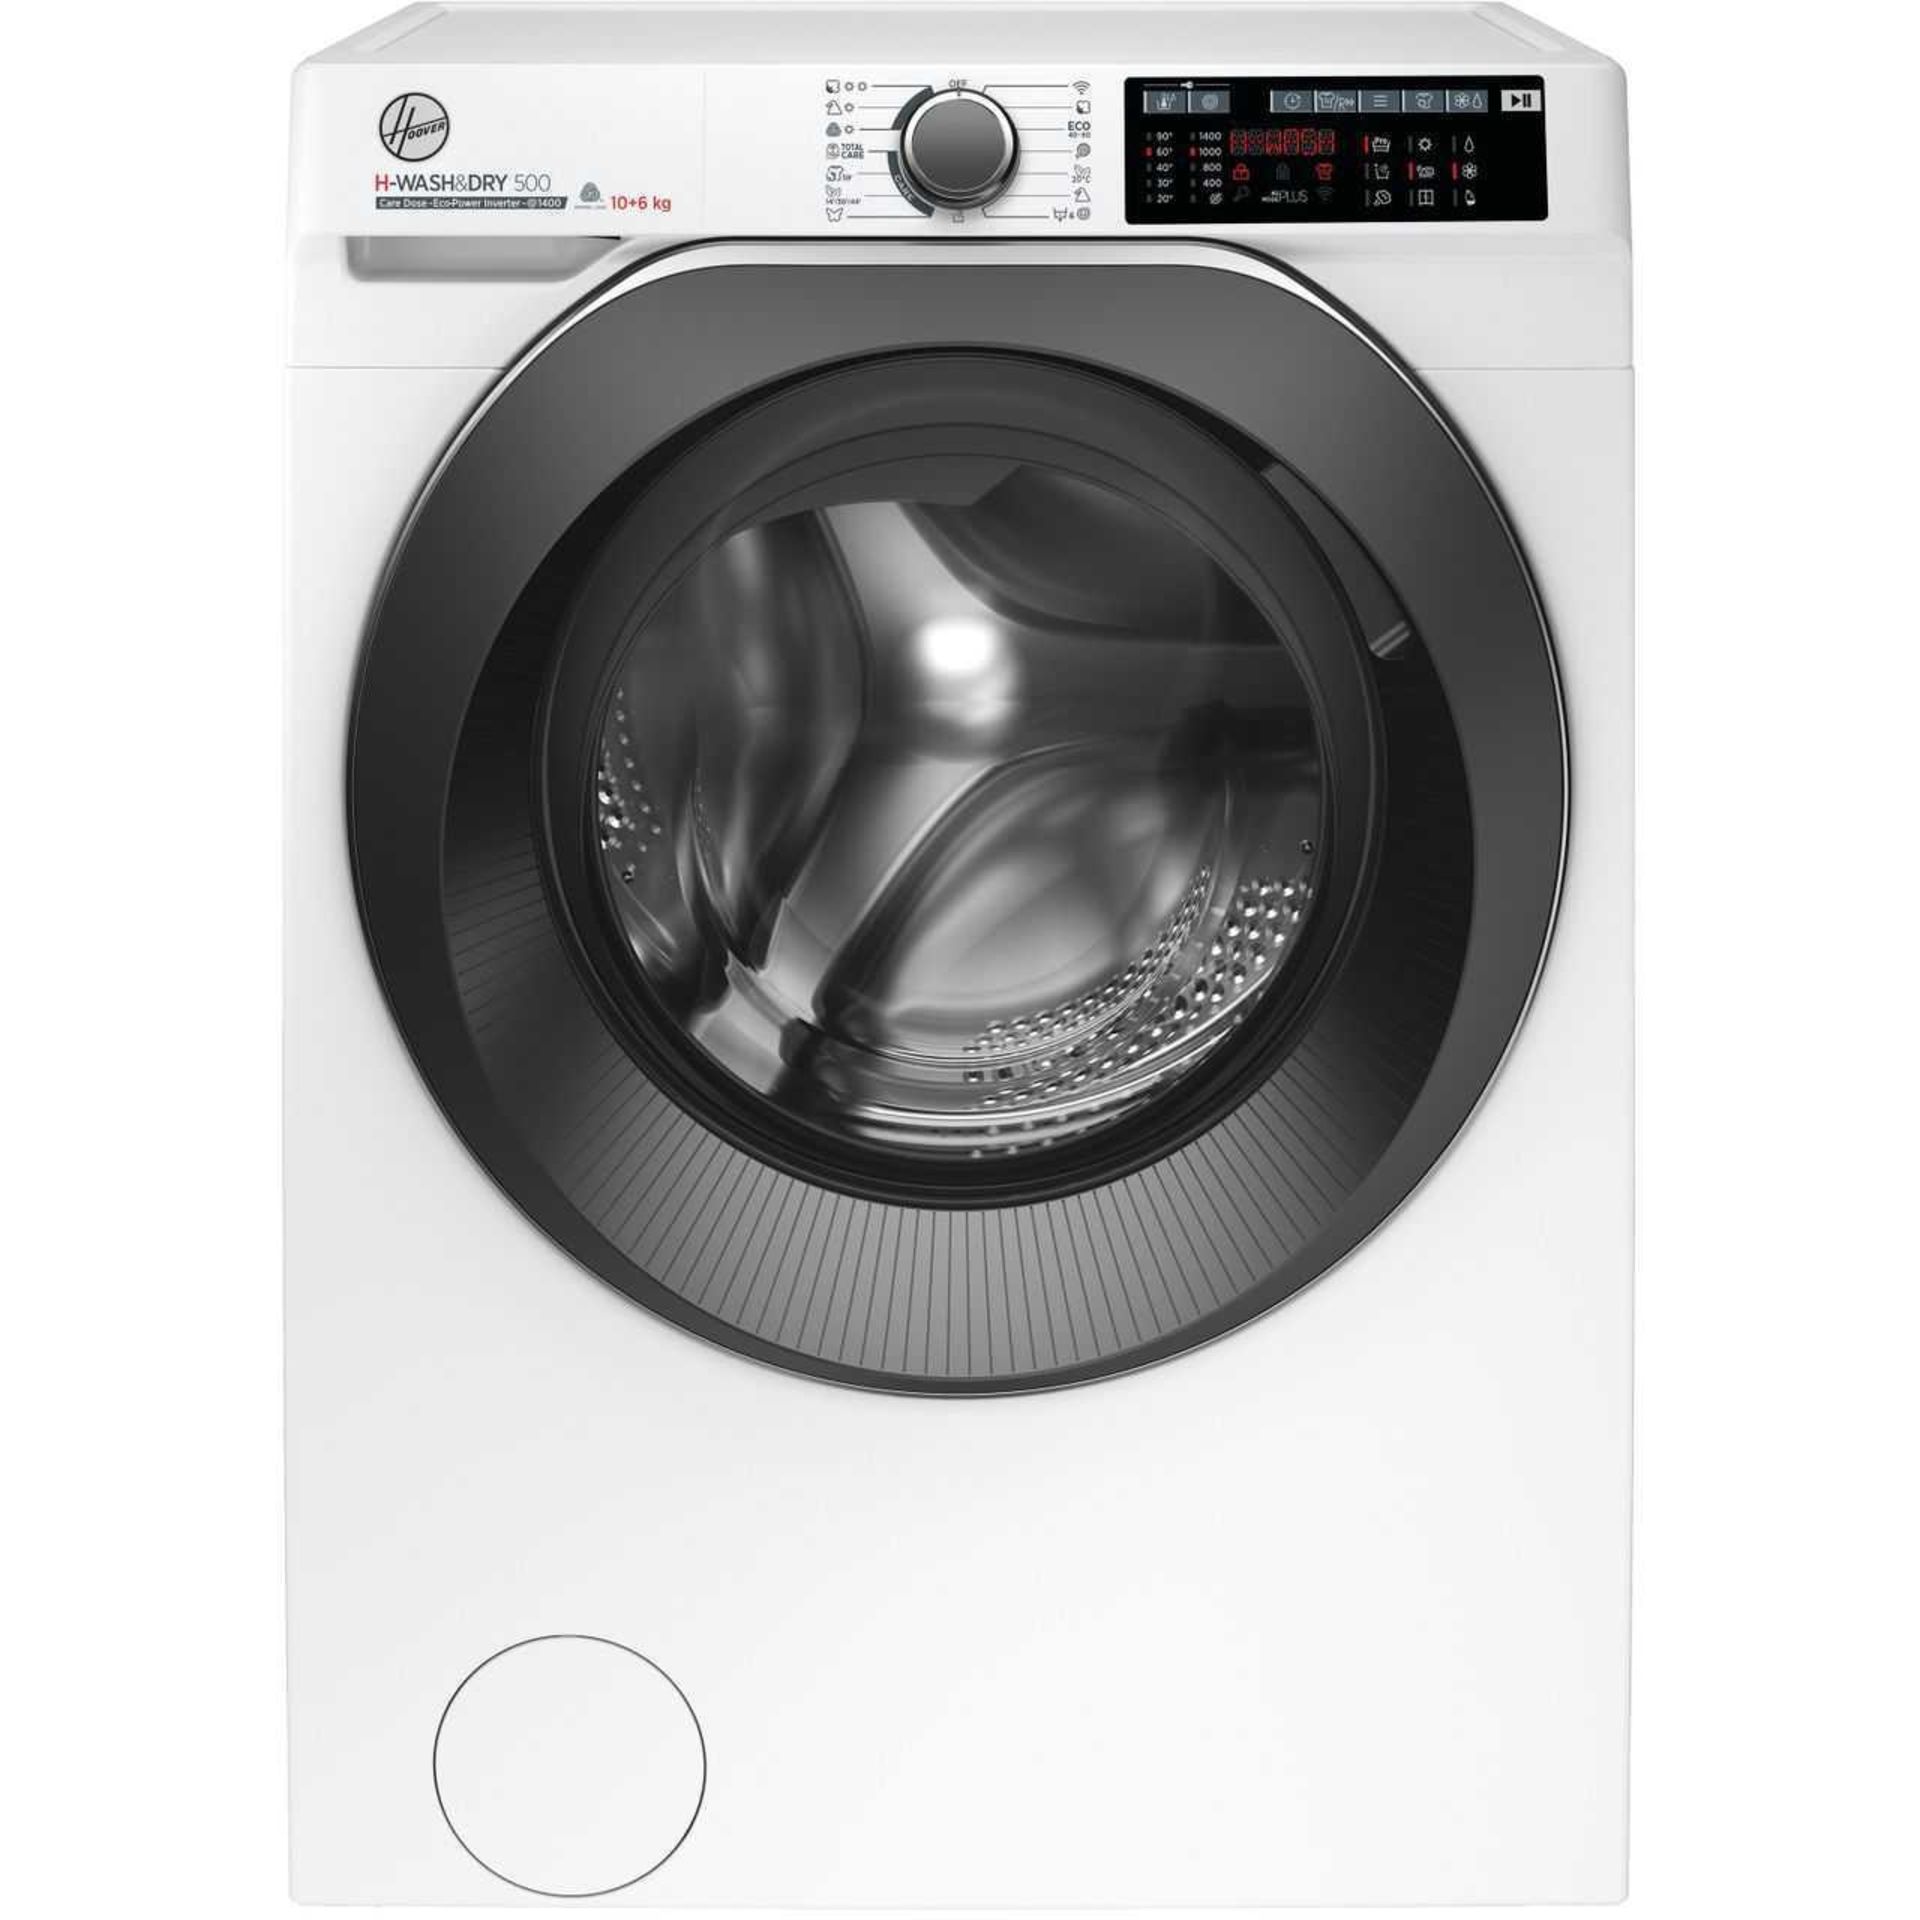 RRP £530 Wrapped Hoover Hdd4106Ambc-80 H-Wash&Dry 500 10&6Kg Washer/Dryer